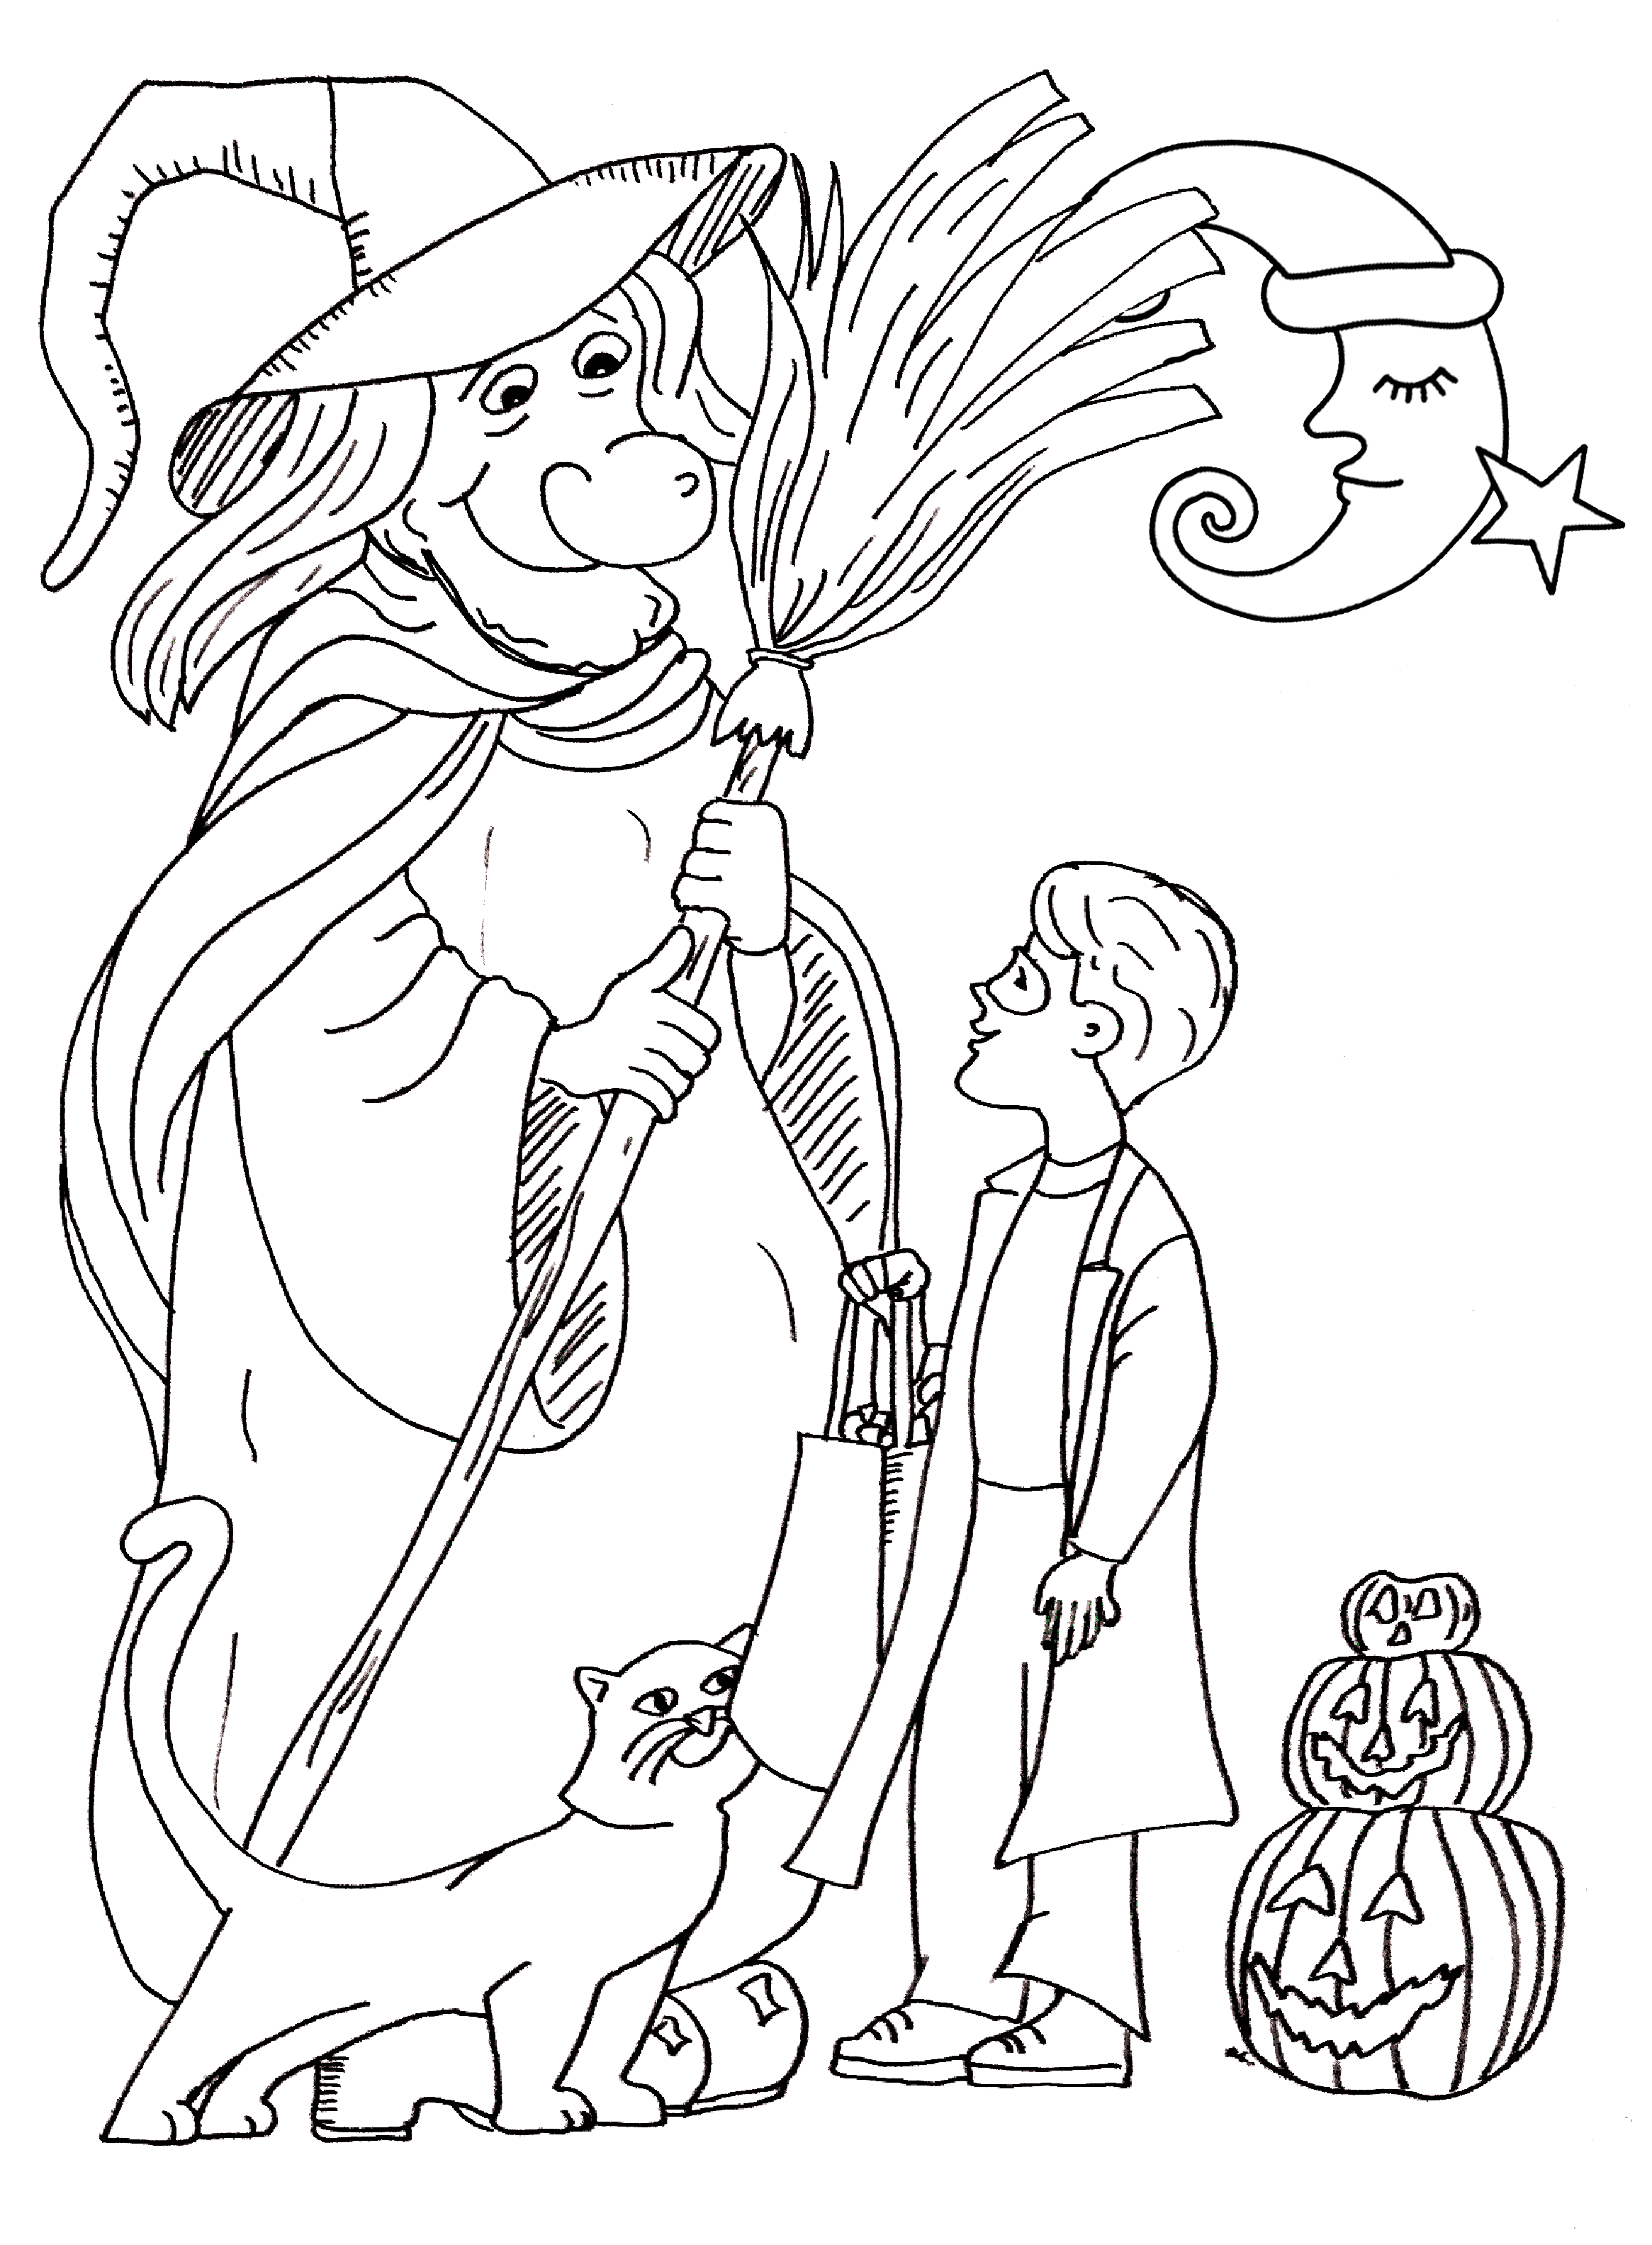 This witch gives candy to children!